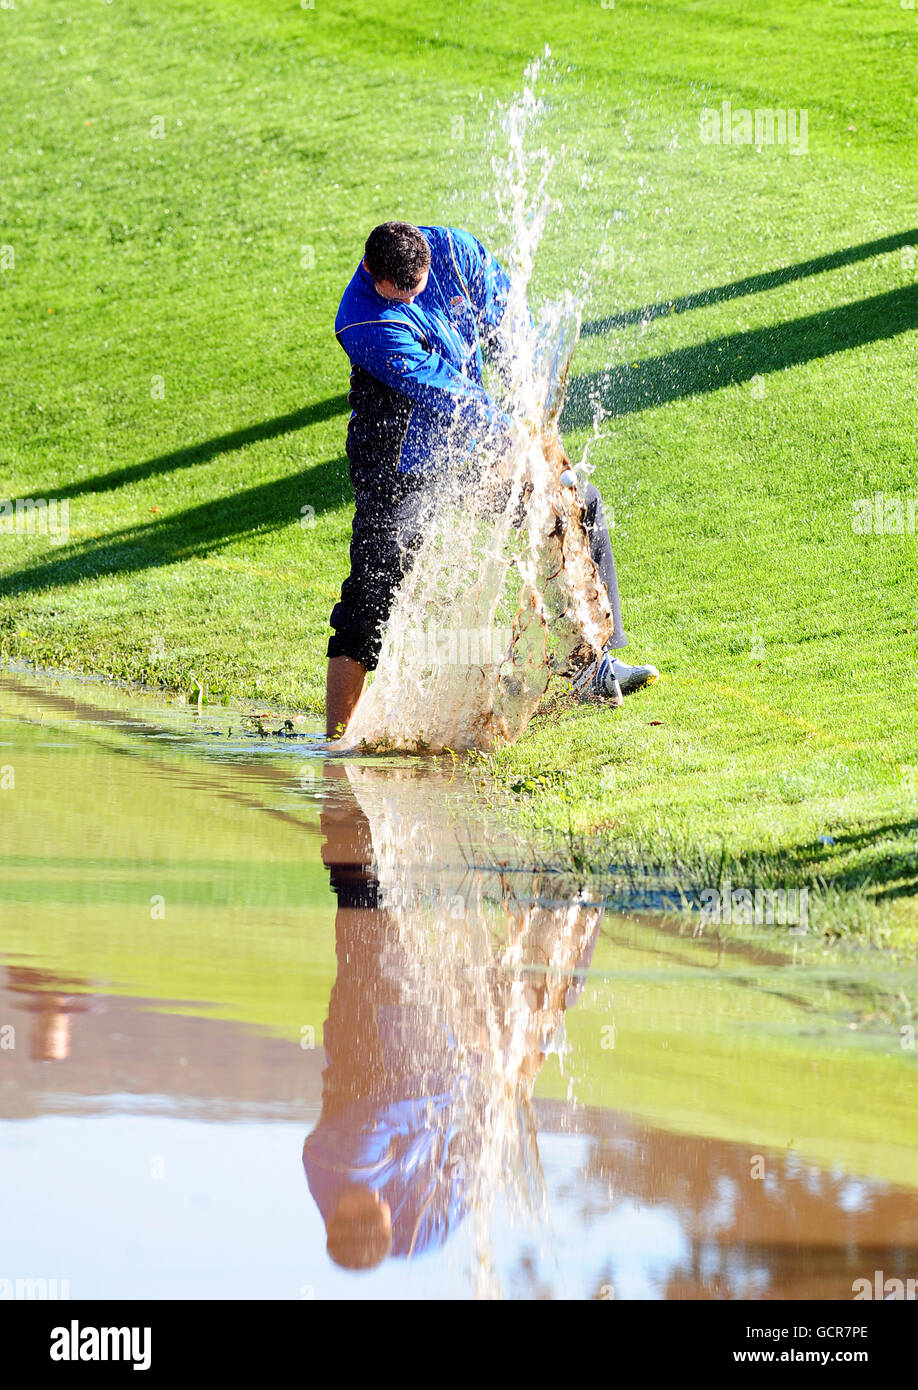 Golf - 38th Ryder Cup - Europe v USA - Day Four - Celtic Manor Resort. Europe's Martin kaymer plays a shot from the water during the Ryder Cup at Celtic Manor, Newport. Stock Photo